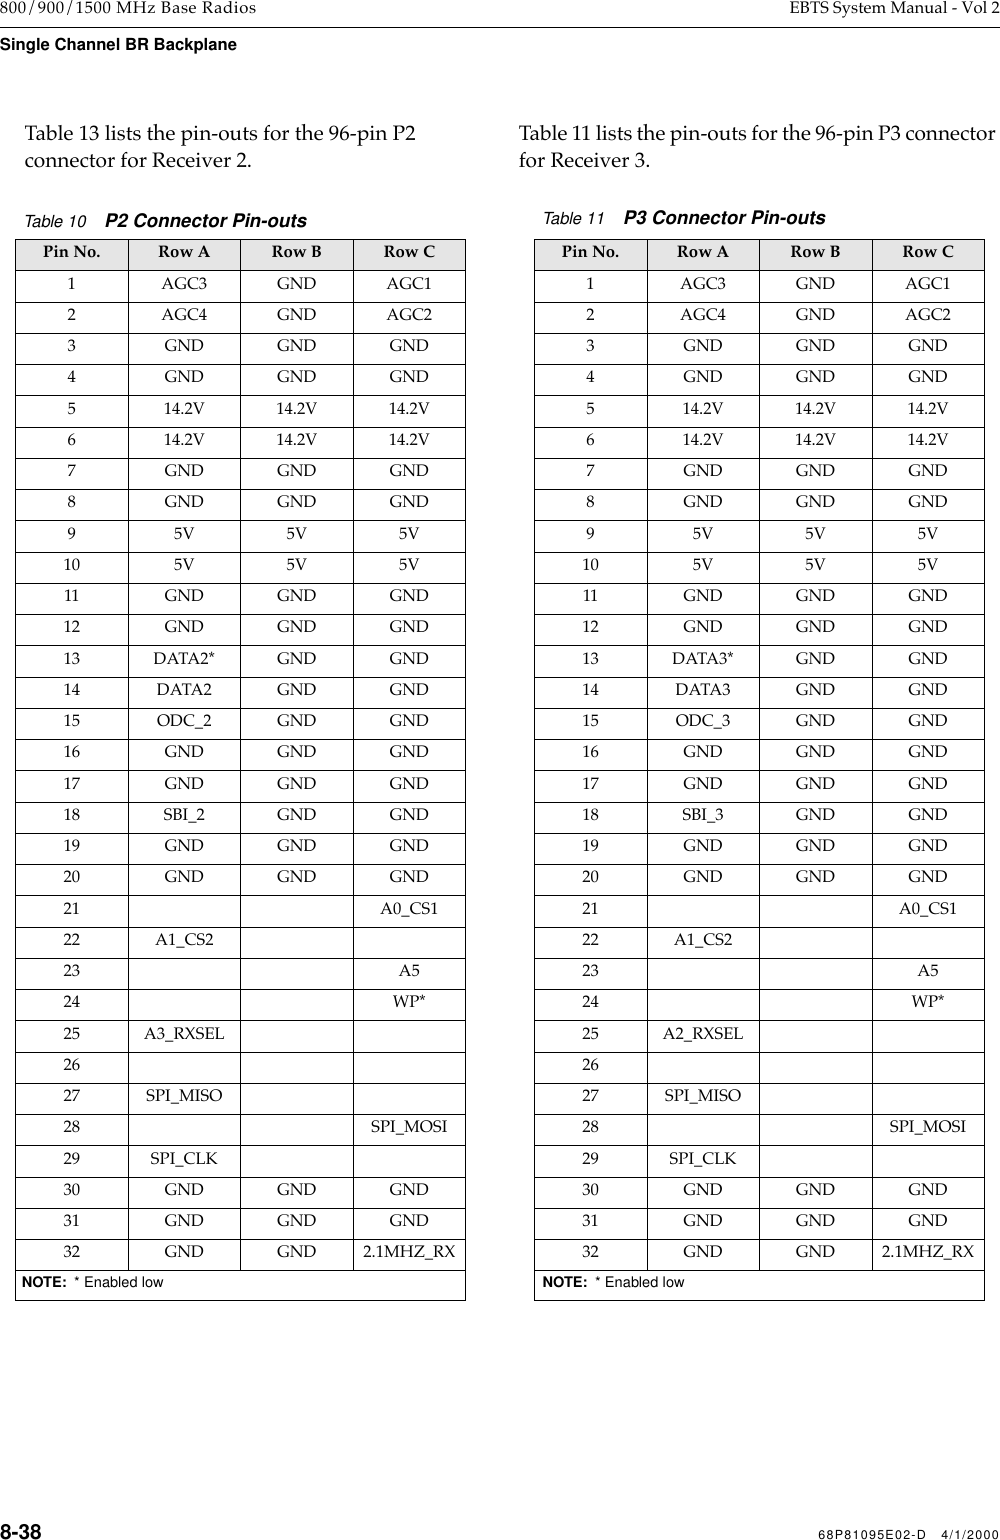 8-38 68P81095E02-D   4/1/2000800/900/1500 MHz Base Radios EBTS System Manual - Vol 2Single Channel BR BackplaneTable 13 lists the pin-outs for the 96-pin P2 connector for Receiver 2.Table 11 lists the pin-outs for the 96-pin P3 connector for Receiver 3.Table 10    P2 Connector Pin-outs Pin No. Row A Row B  Row C1 AGC3 GND AGC12 AGC4 GND AGC23 GND GND GND4 GND GND GND5 14.2V 14.2V 14.2V6 14.2V 14.2V 14.2V7 GND GND GND8 GND GND GND9 5V5V5V10 5V 5V 5V11 GND GND GND12 GND GND GND13 DATA2* GND GND14 DATA2 GND GND15 ODC_2 GND GND16 GND GND GND17 GND GND GND18 SBI_2 GND GND19 GND GND GND20 GND GND GND21 A0_CS122 A1_CS223 A524 WP*25 A3_RXSEL2627 SPI_MISO28 SPI_MOSI29 SPI_CLK30 GND GND GND31 GND GND GND32 GND GND 2.1MHZ_RXNOTE:  * Enabled lowTable 11    P3 Connector Pin-outsPin No. Row A Row B  Row C1 AGC3 GND AGC12 AGC4 GND AGC23 GND GND GND4 GND GND GND5 14.2V 14.2V 14.2V6 14.2V 14.2V 14.2V7 GND GND GND8 GND GND GND9 5V5V5V10 5V 5V 5V11 GND GND GND12 GND GND GND13 DATA3* GND GND14 DATA3 GND GND15 ODC_3 GND GND16 GND GND GND17 GND GND GND18 SBI_3 GND GND19 GND GND GND20 GND GND GND21 A0_CS122 A1_CS223 A524 WP*25 A2_RXSEL2627 SPI_MISO28 SPI_MOSI29 SPI_CLK30 GND GND GND31 GND GND GND32 GND GND 2.1MHZ_RXNOTE:  * Enabled low